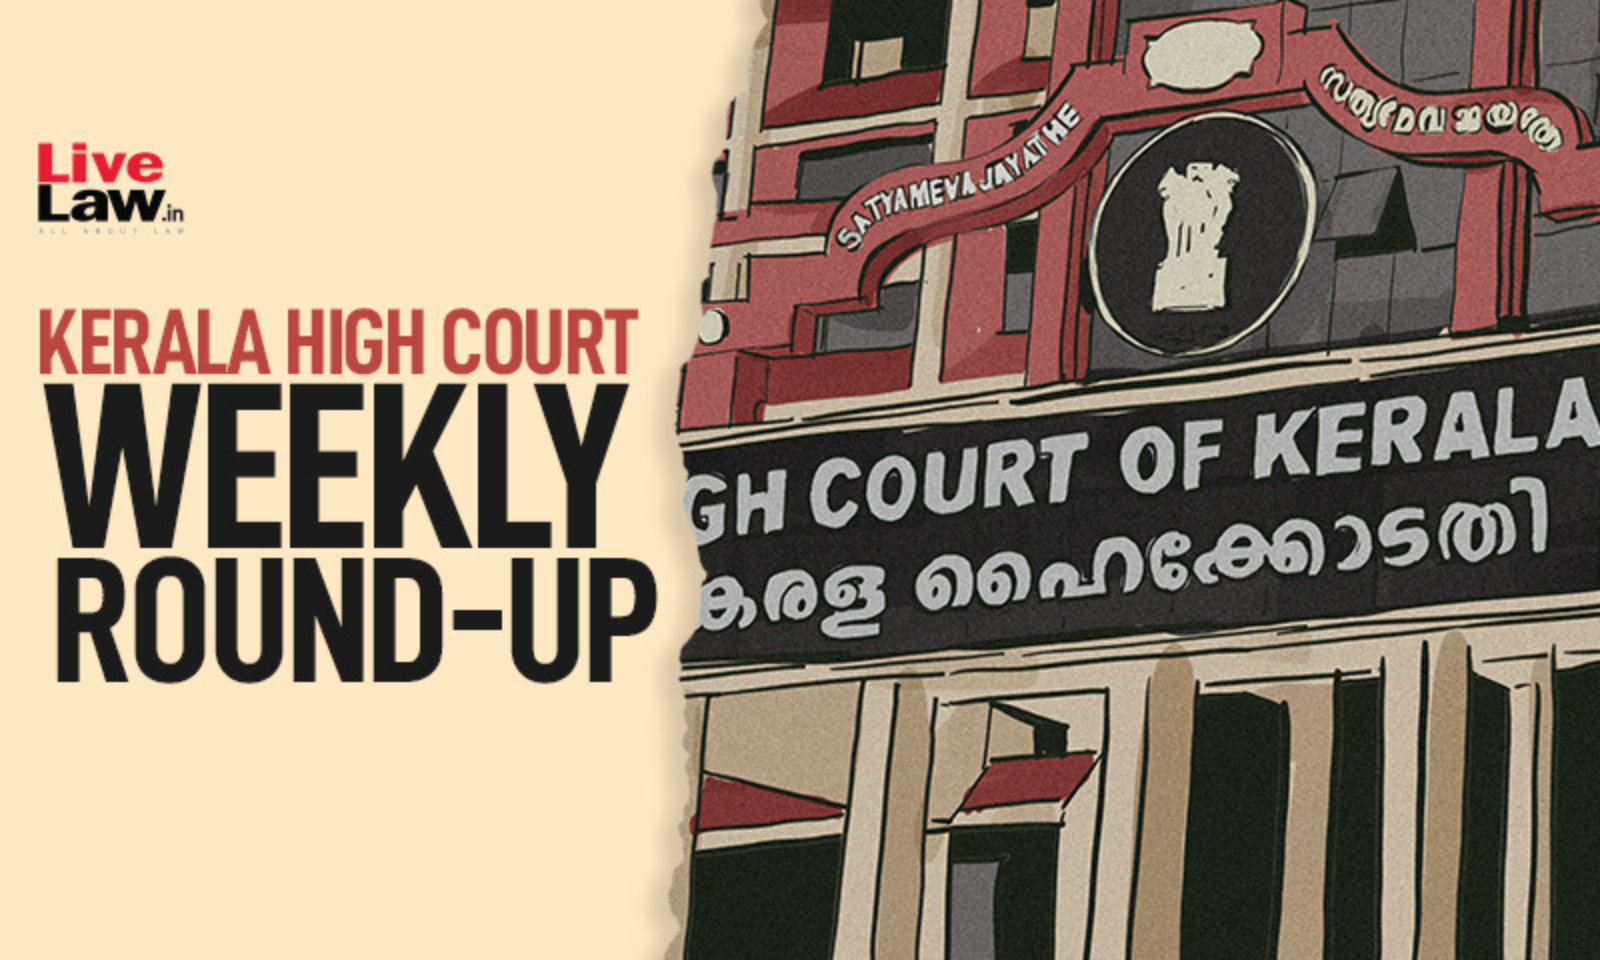 Xxx Com Sex Telagan - Kerala High Court Weekly Round-Up: July 18 To July 24, 2022